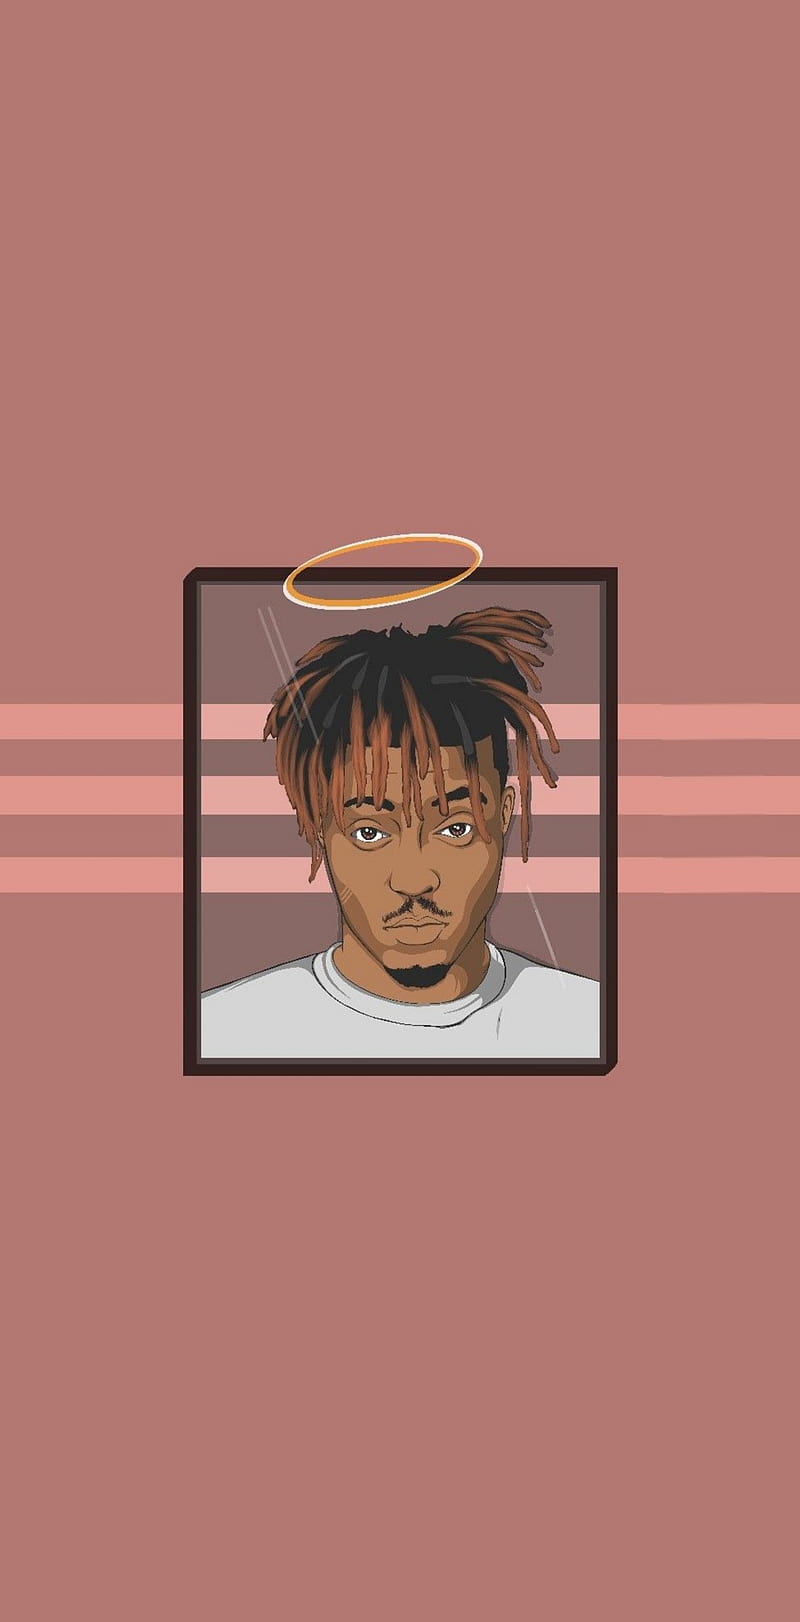 Download Juice Wrld Aesthetic In Red Out Of Car Wallpaper